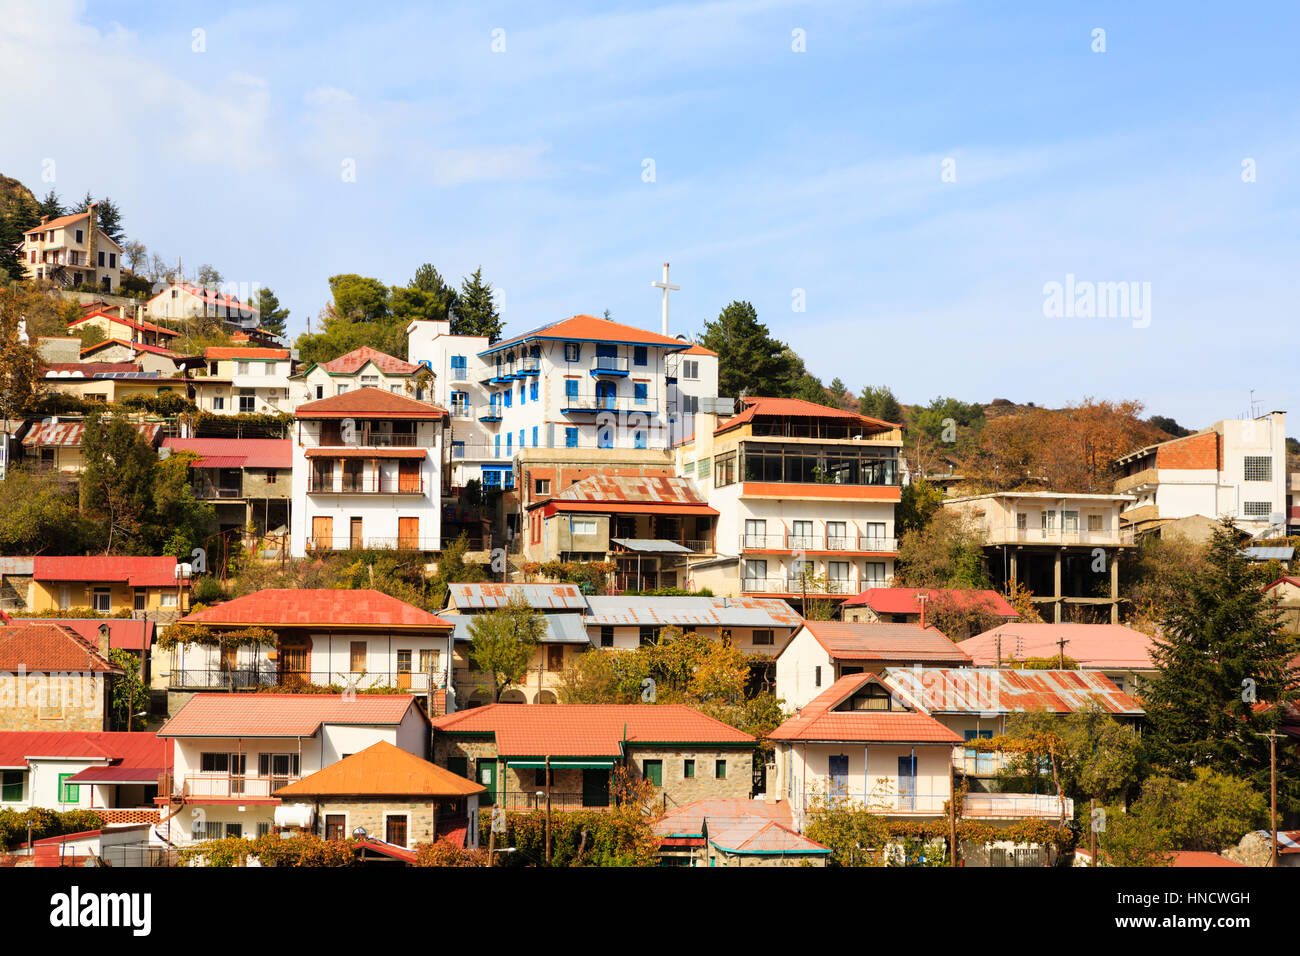 Village houses cling to the hillside, Pedoulas, Cyprus Stock Photo